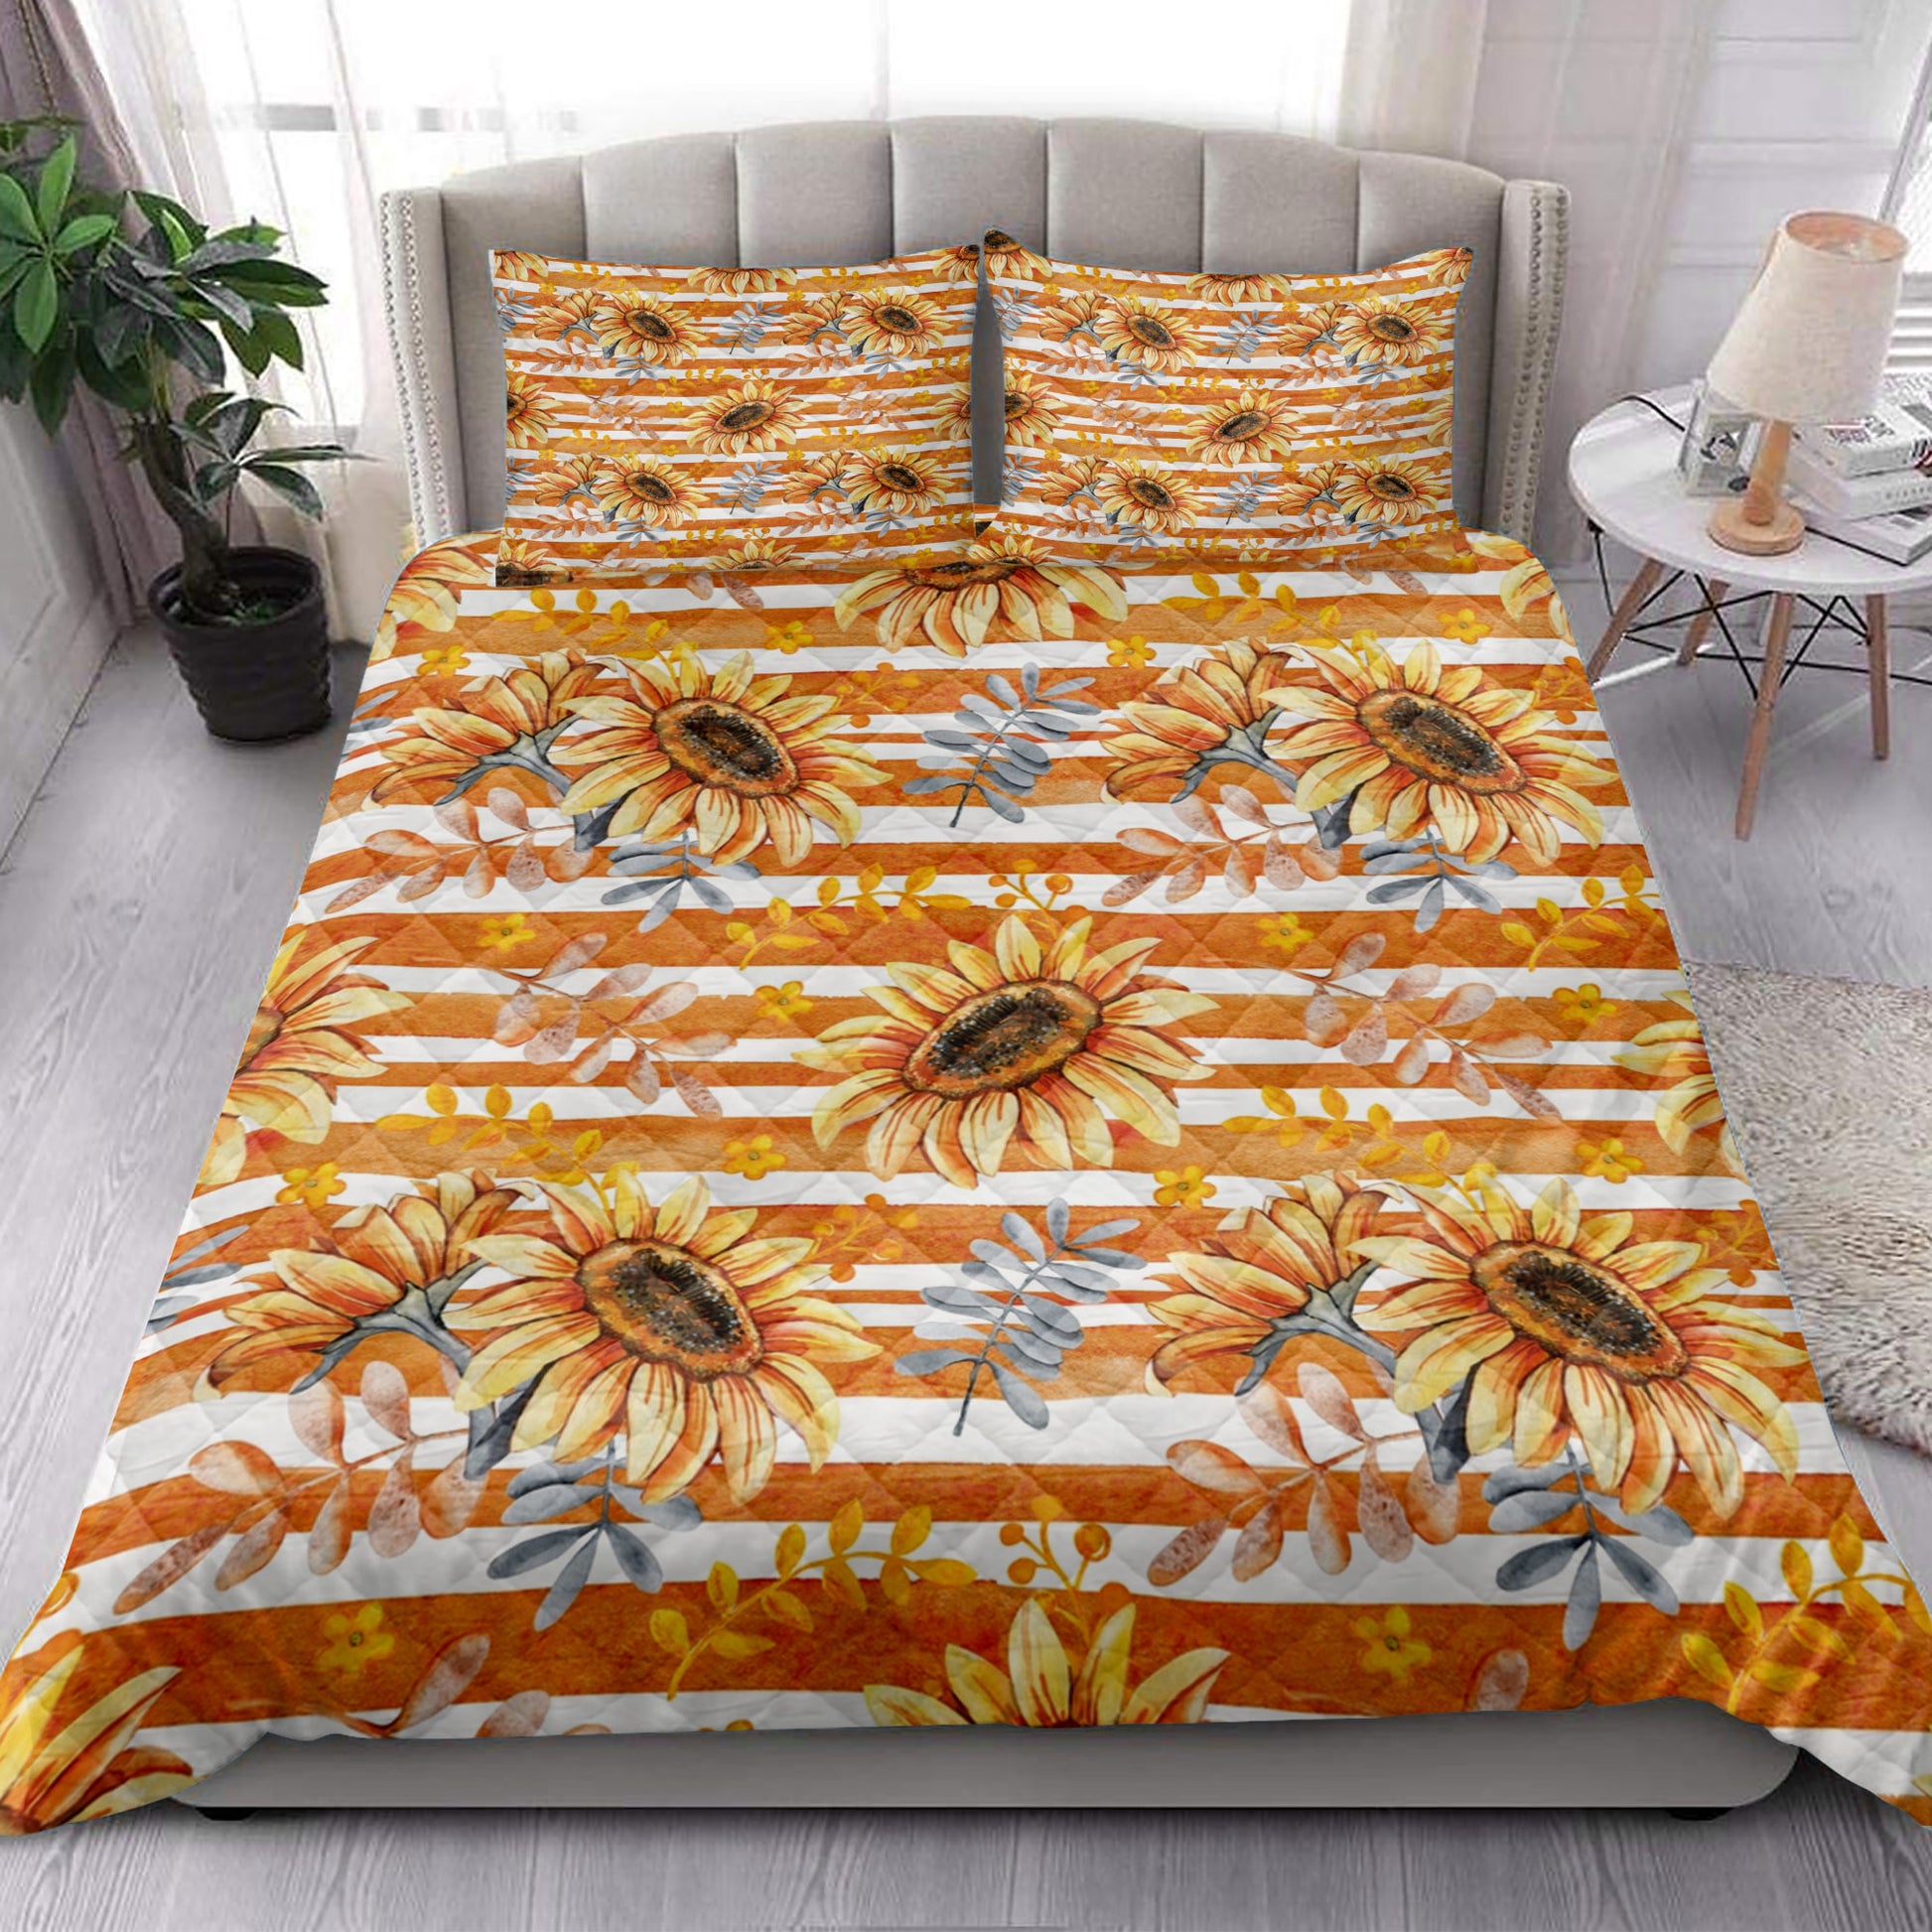 Ohaprints-Quilt-Bed-Set-Pillowcase-Autumn-Sunflower-Berries-Fall-Harves-Leaves-Autumn-Thanksgiving-Holiday-Blanket-Bedspread-Bedding-3288-King (90'' x 100'')